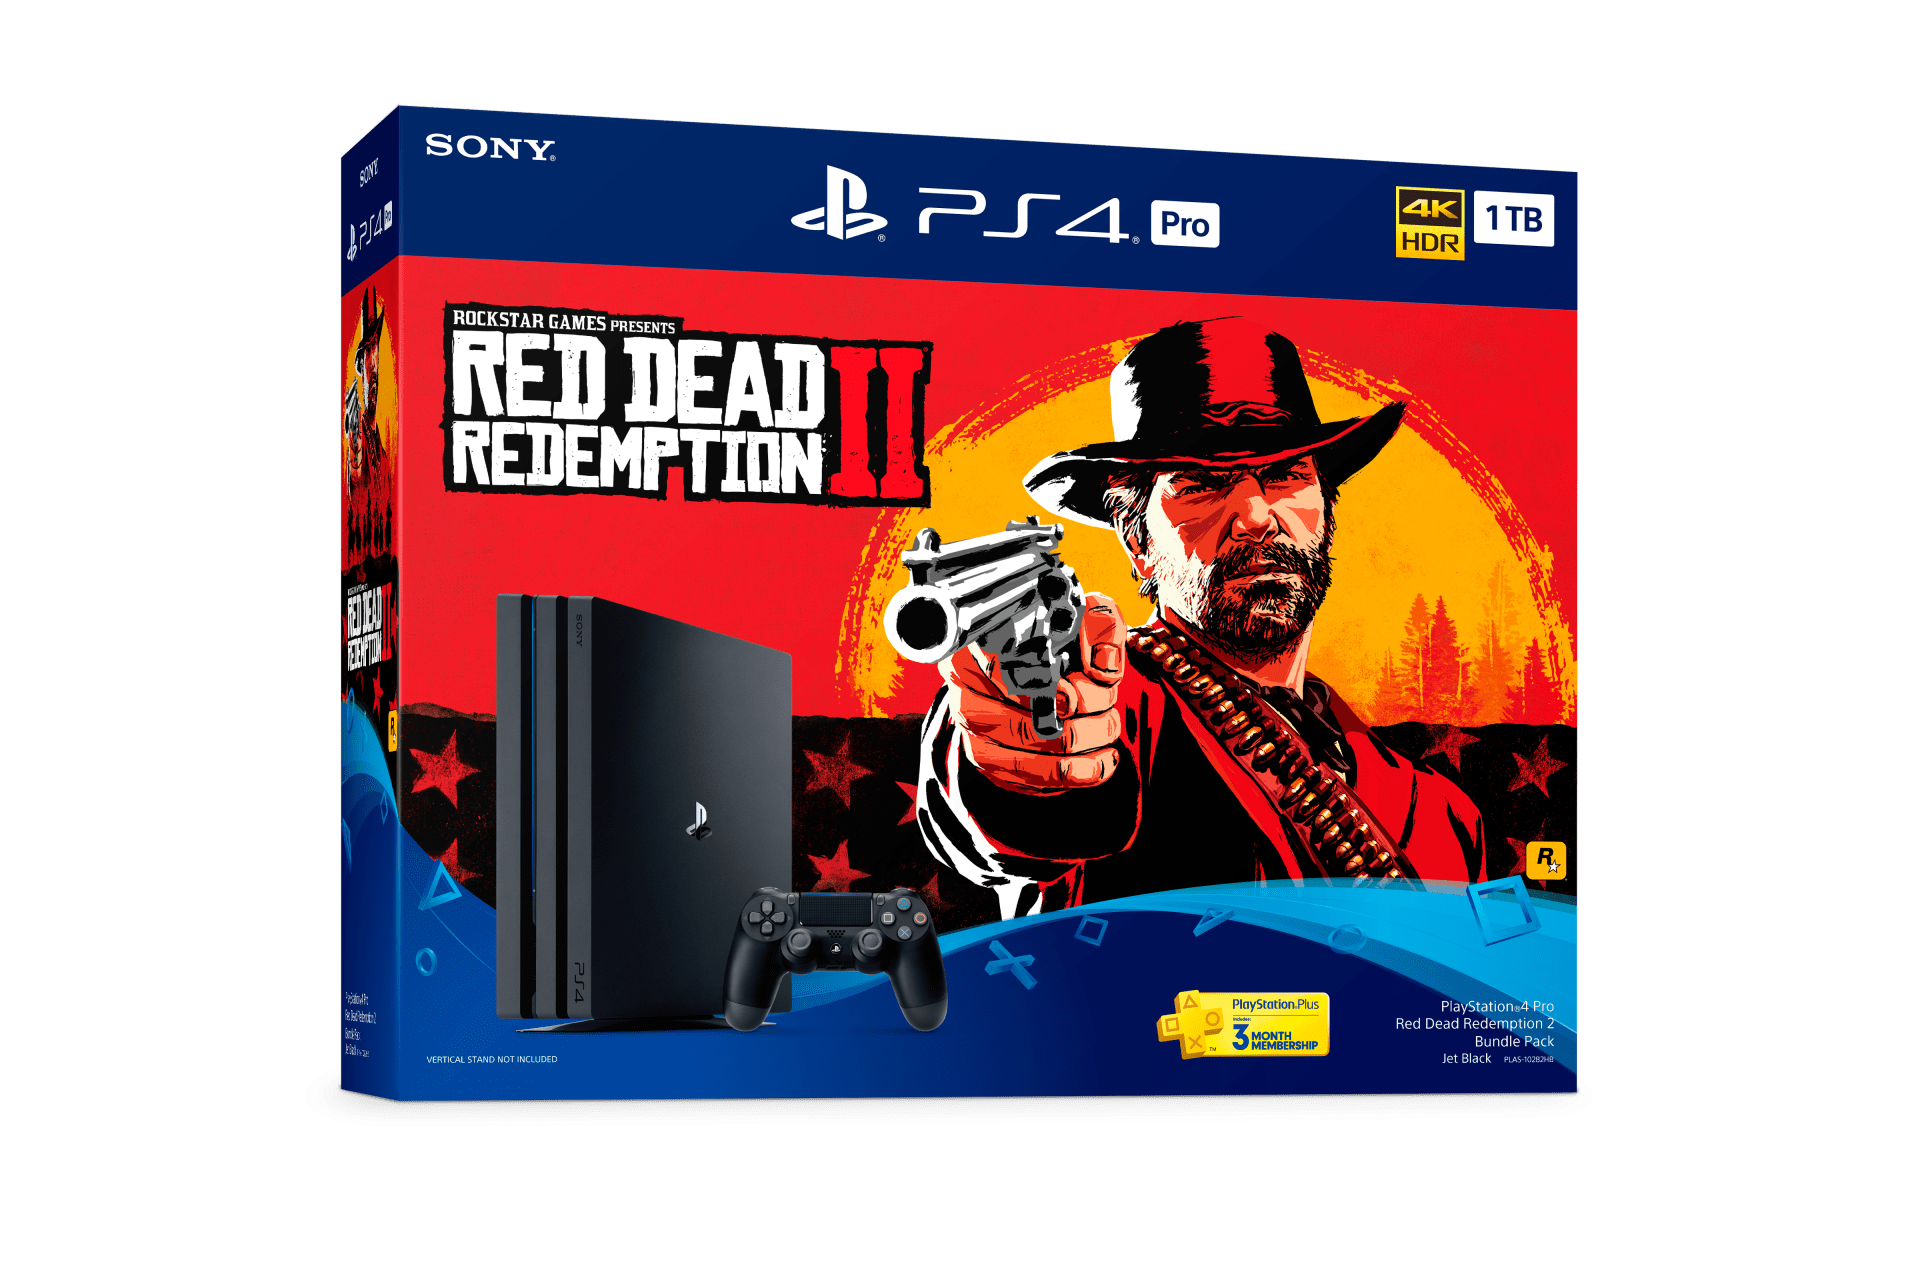 Sony PLAYSTATION 4 Pro 1tb rdr2. Ред дед редемпшн на ps4. Sony PLAYSTATION 4 Slim Red Dead Redemption 2. Red Dead Redemption 2 PLAYSTATION. Игра red ps4